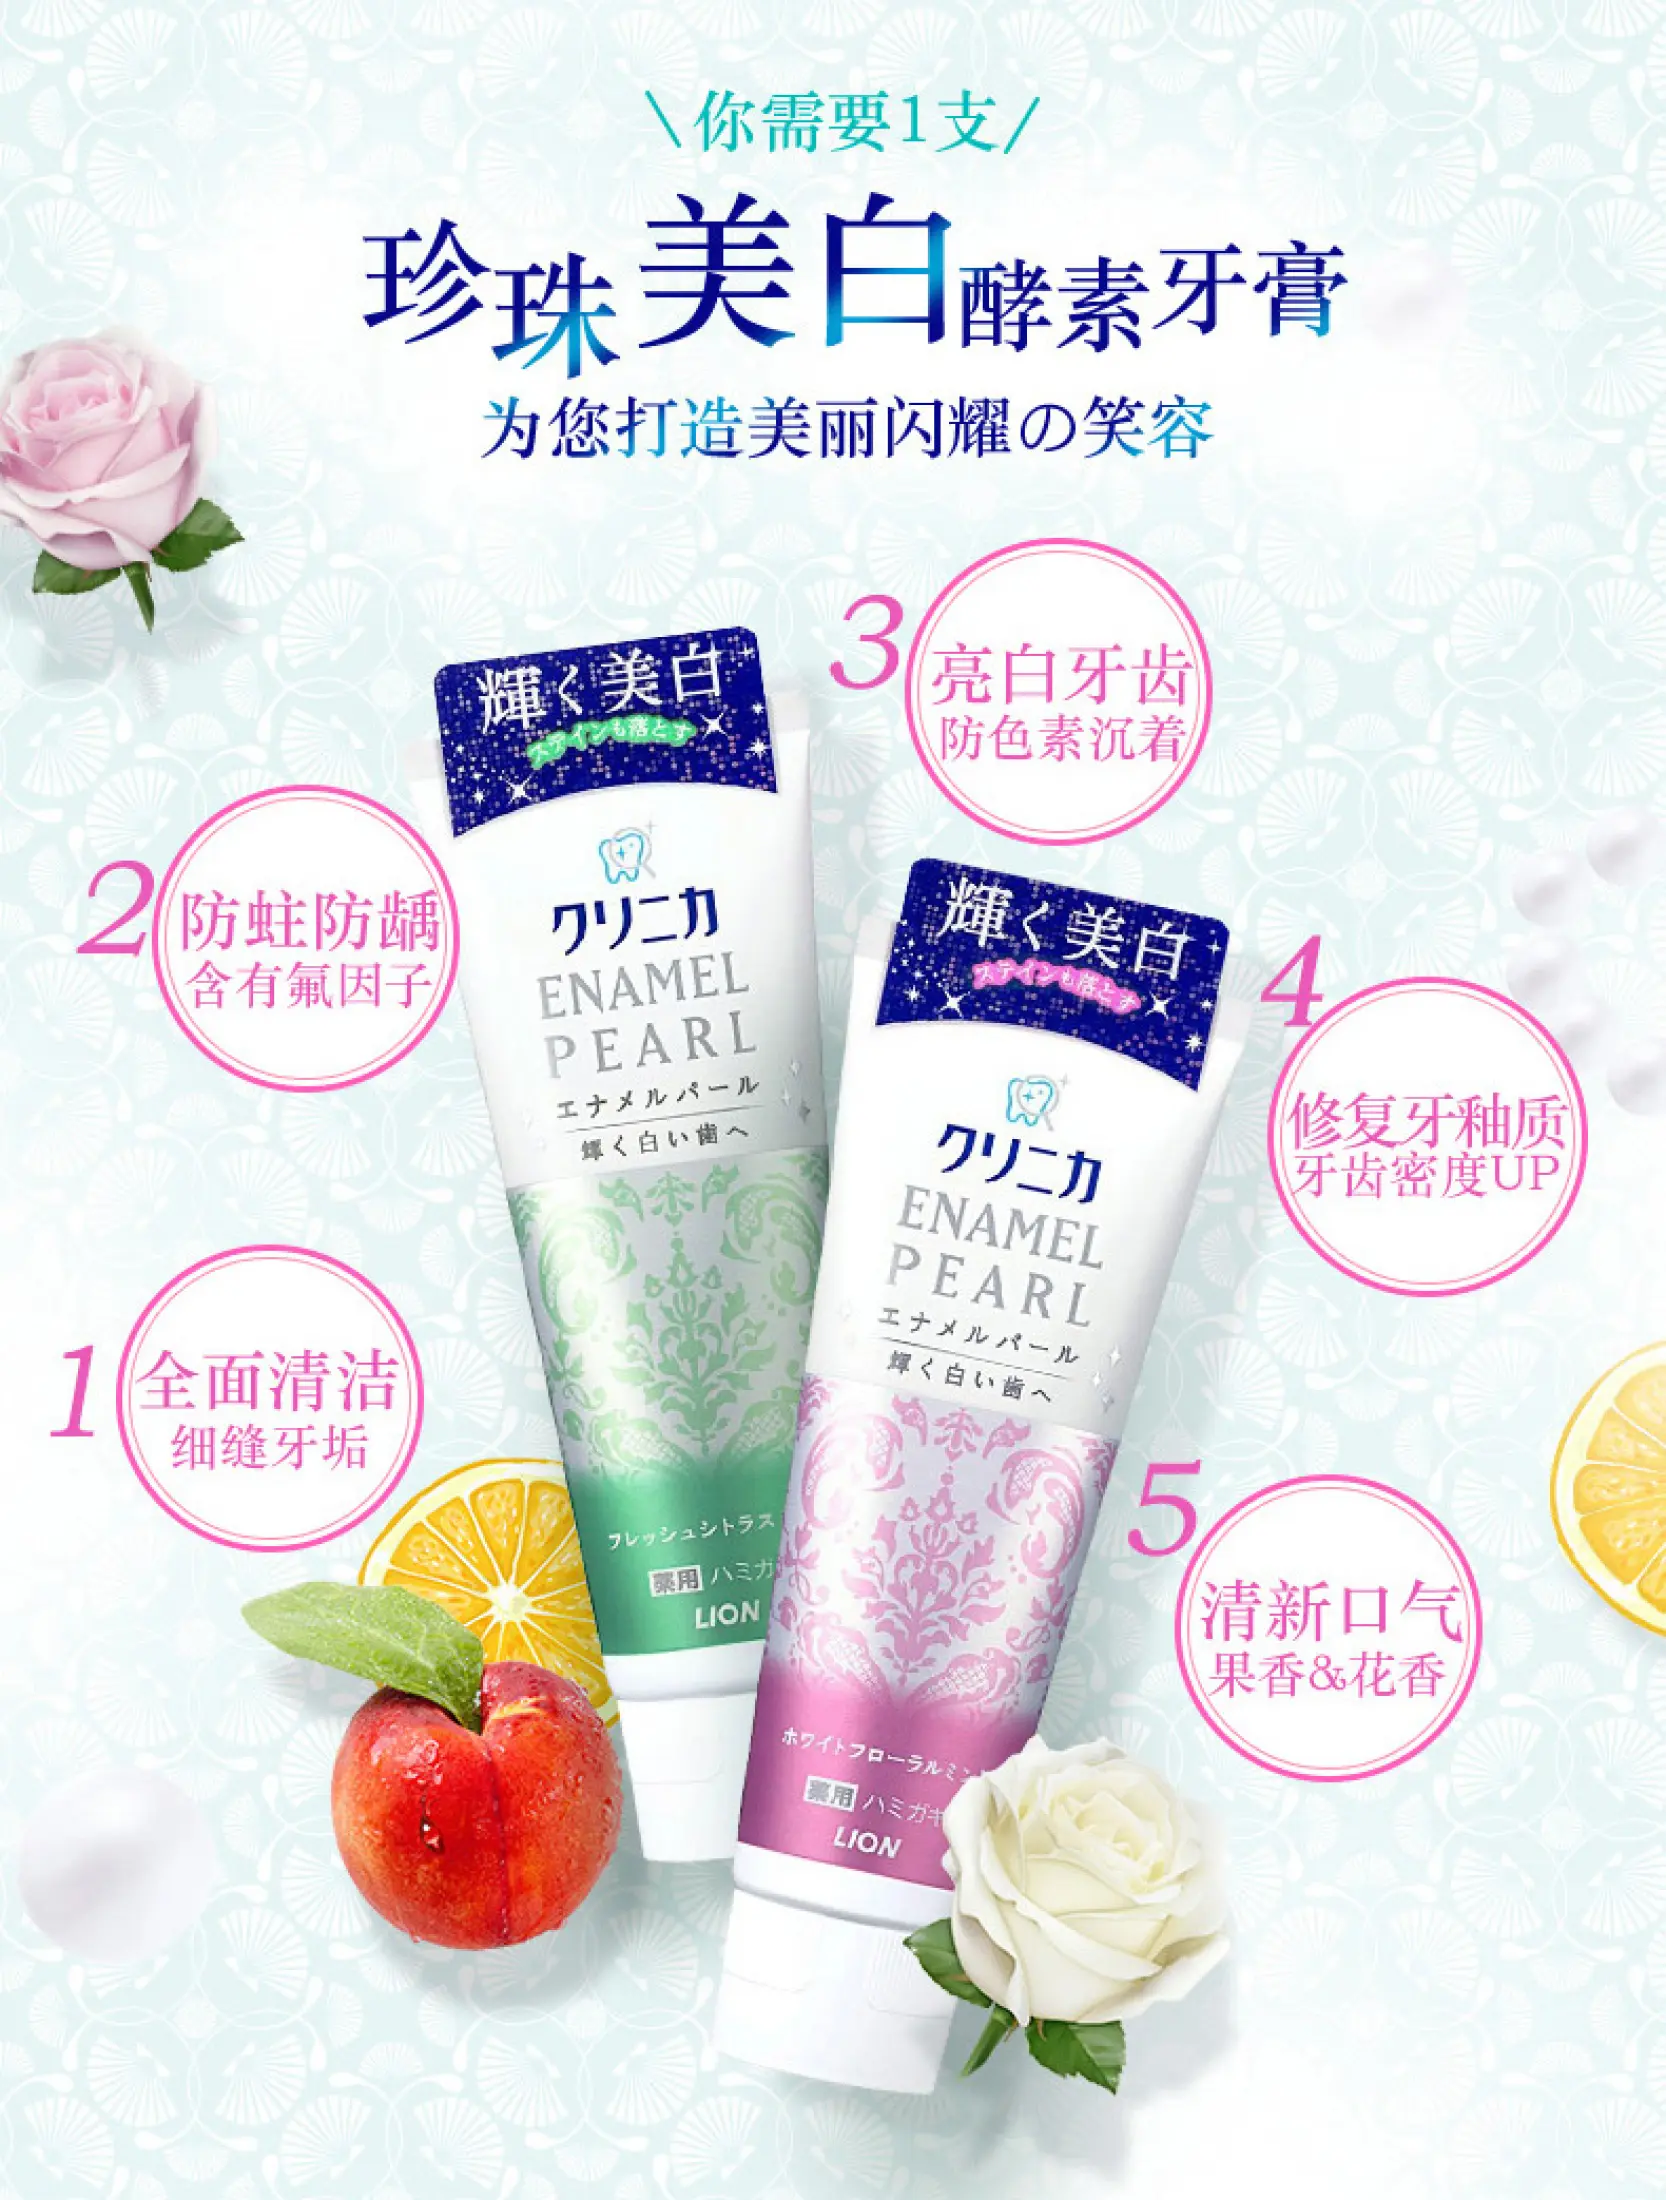 Japanese brand Cainiao Wuhan Bonded Warehouse No. 1 Shipment Japan  LION/Lion Pearl Enzyme Whitening Toothpaste to remove yellow tartar stains  and brighten teeth 130g tone Enzyme pearl whitens and protects tooth enamel  |